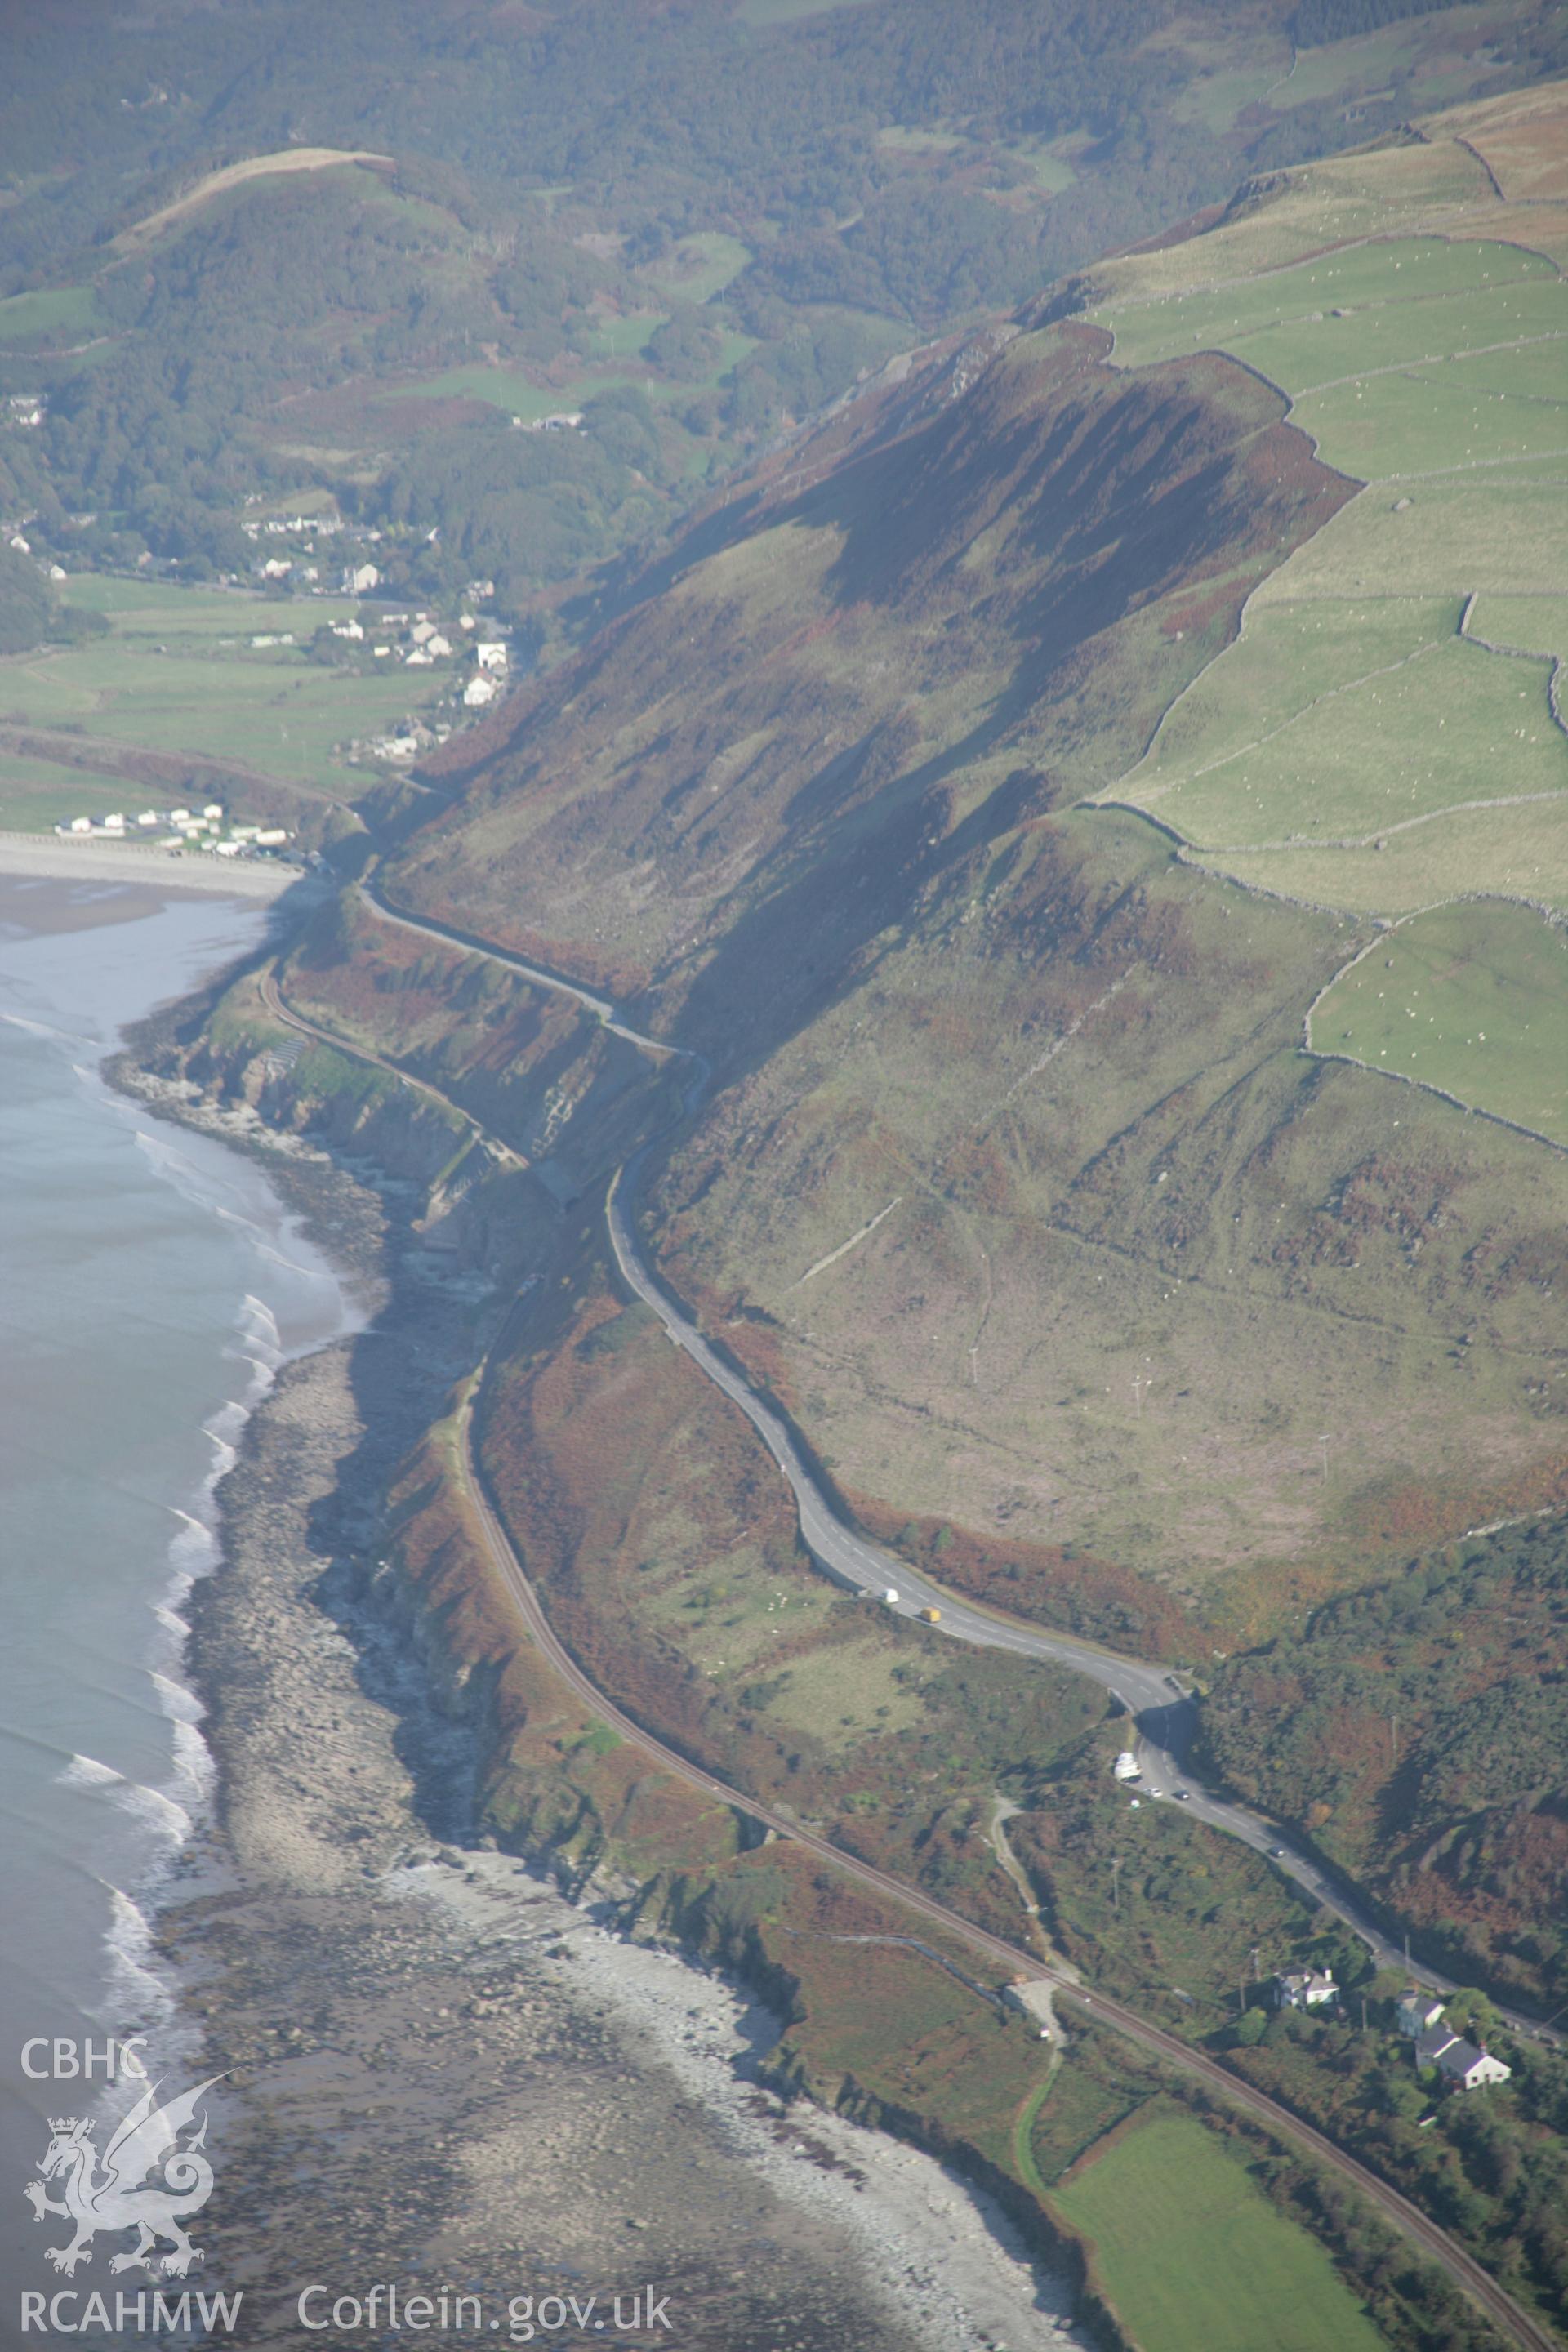 RCAHMW colour oblique aerial photograph of Cambrian Coast railway with engineering along coastal cliffs, viewed from the north-east. Taken on 17 October 2005 by Toby Driver